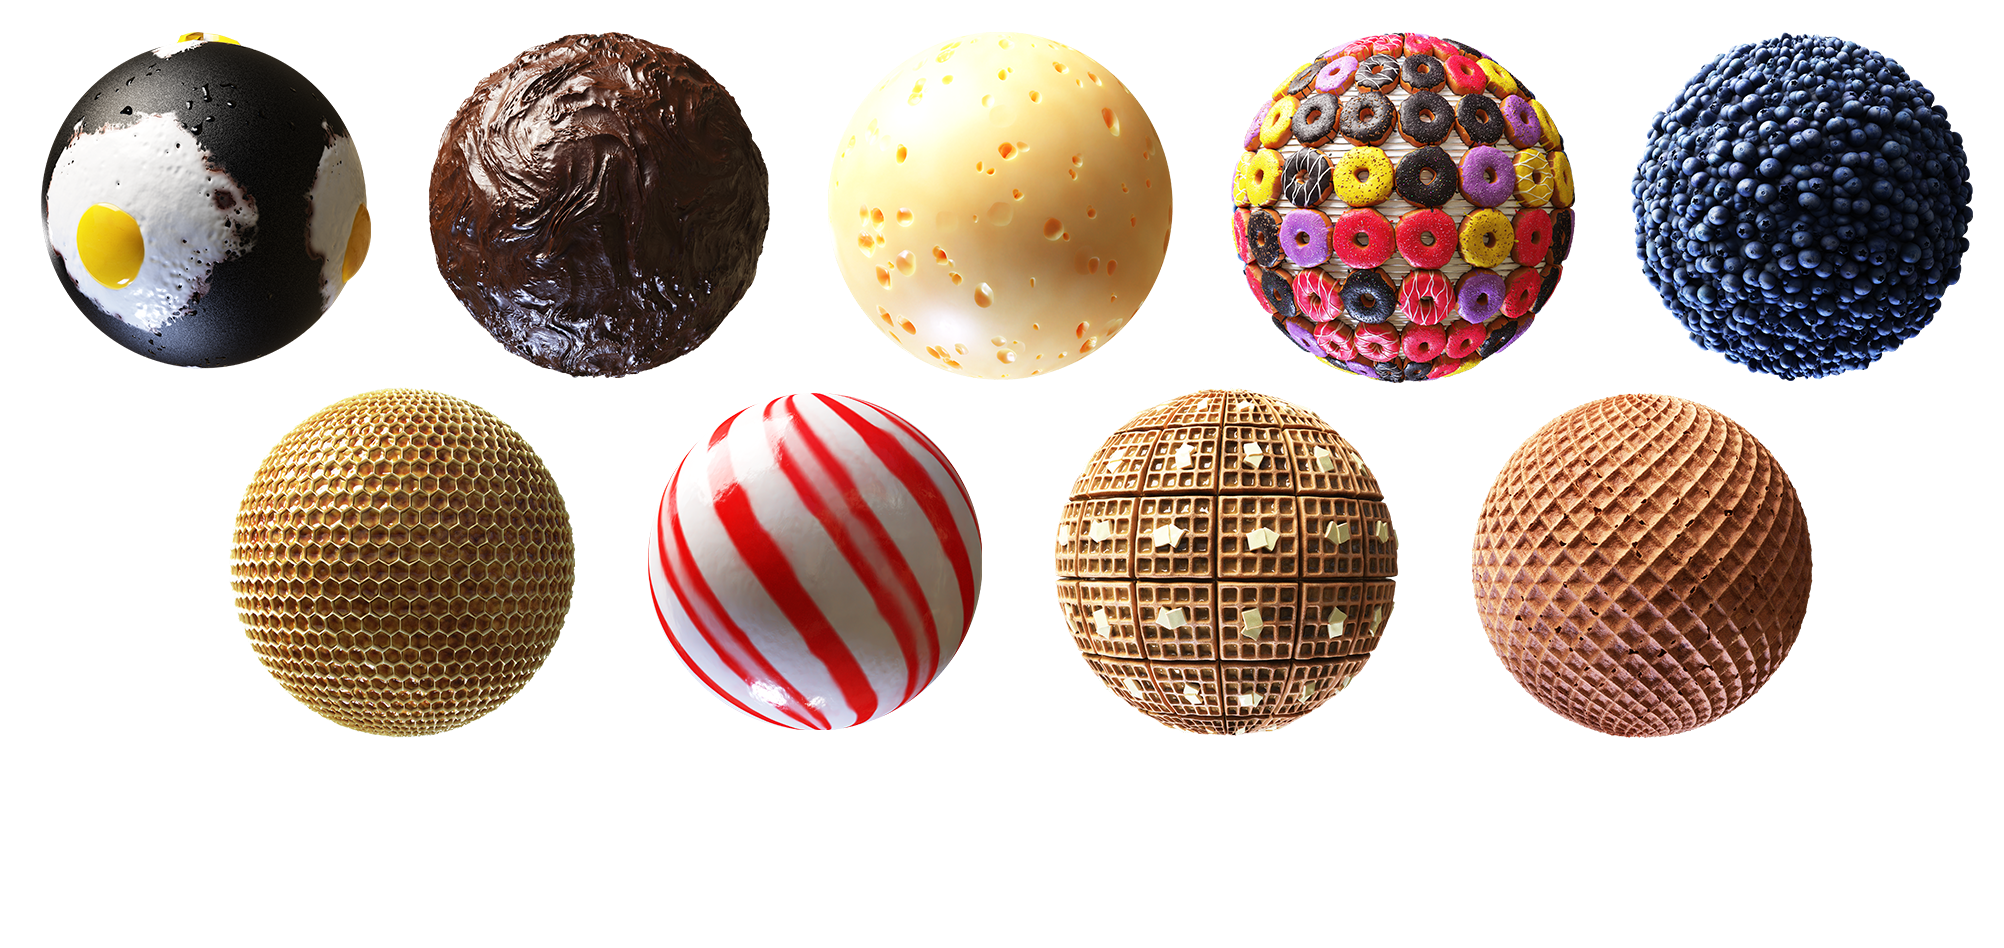 Texture Pack: Food 01